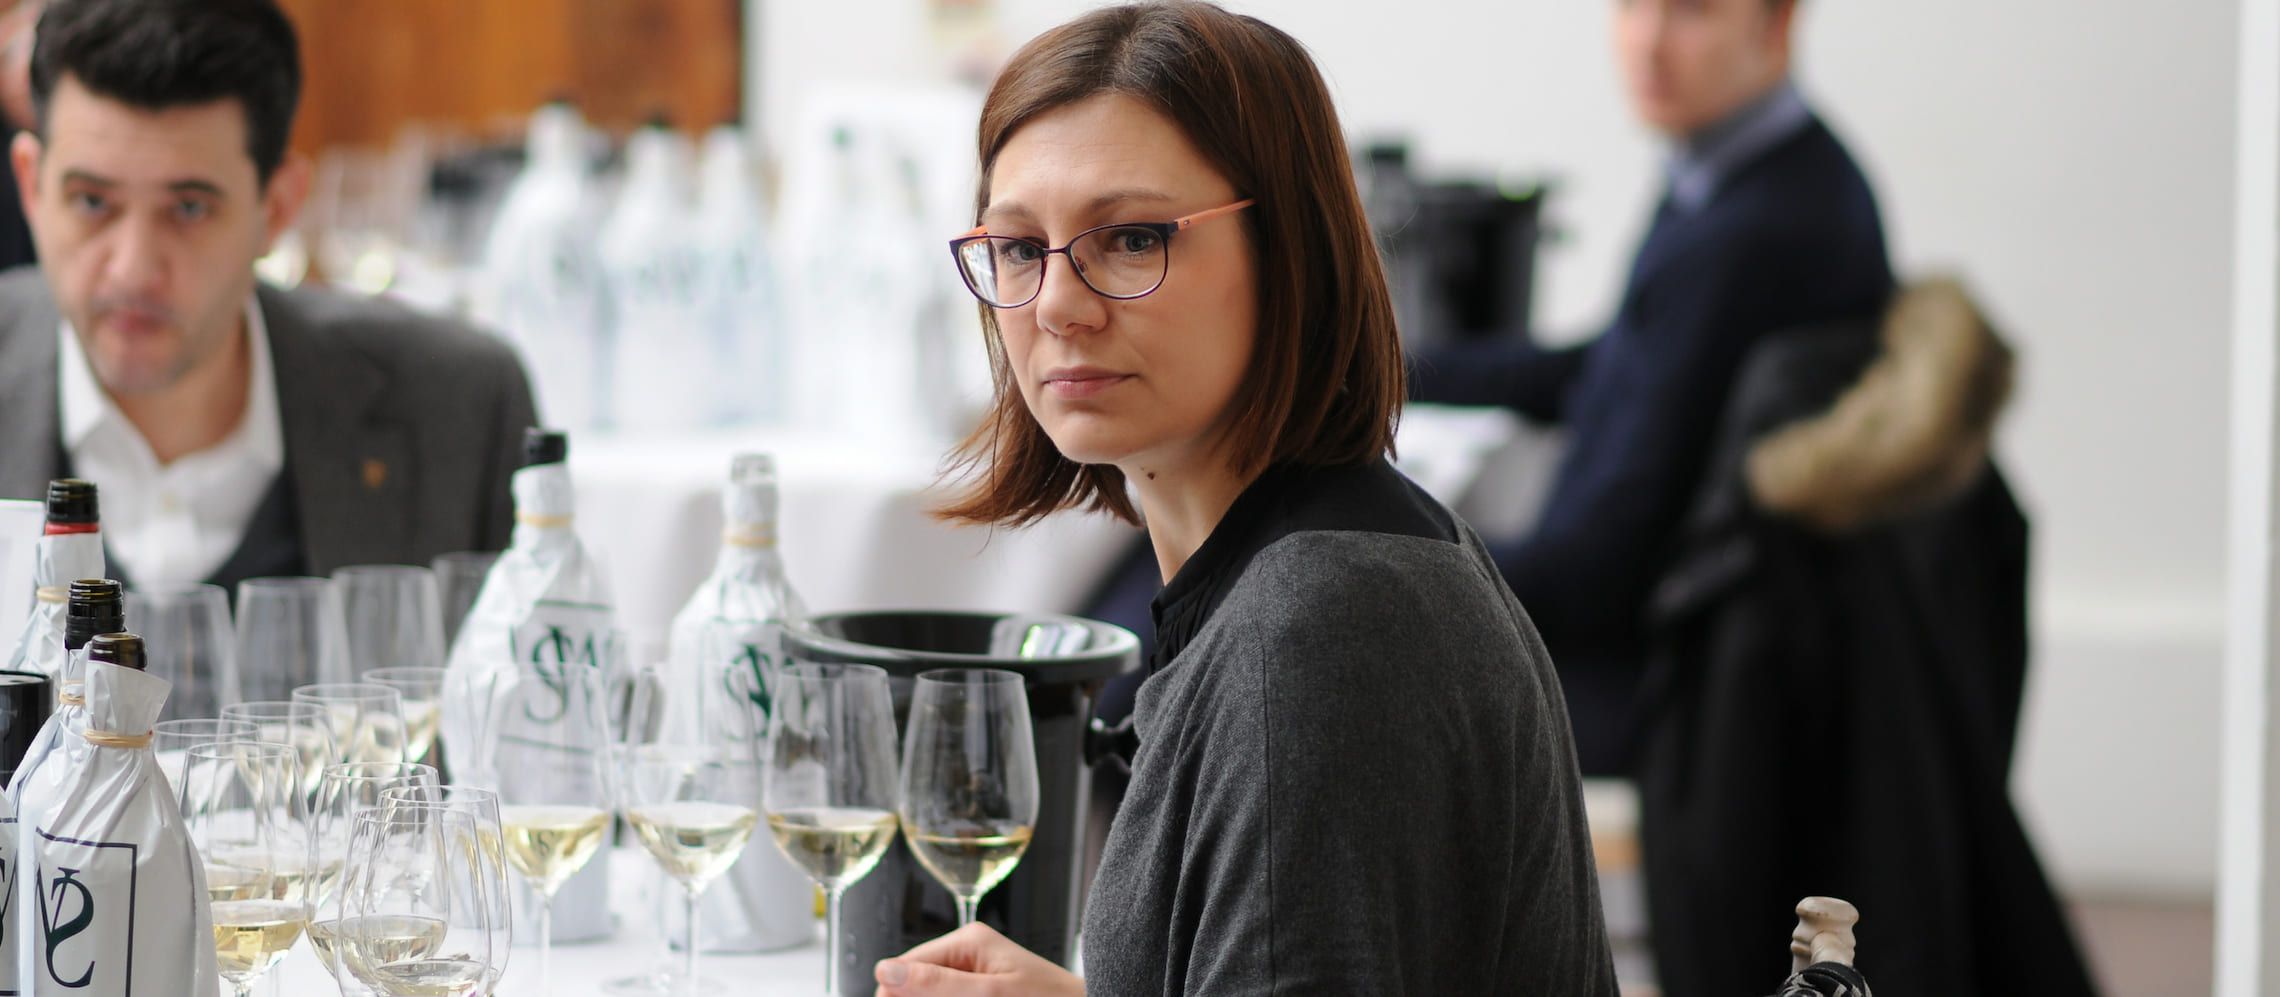 Photo for: Why the London Wine Competition is the world’s most important for trade buyers